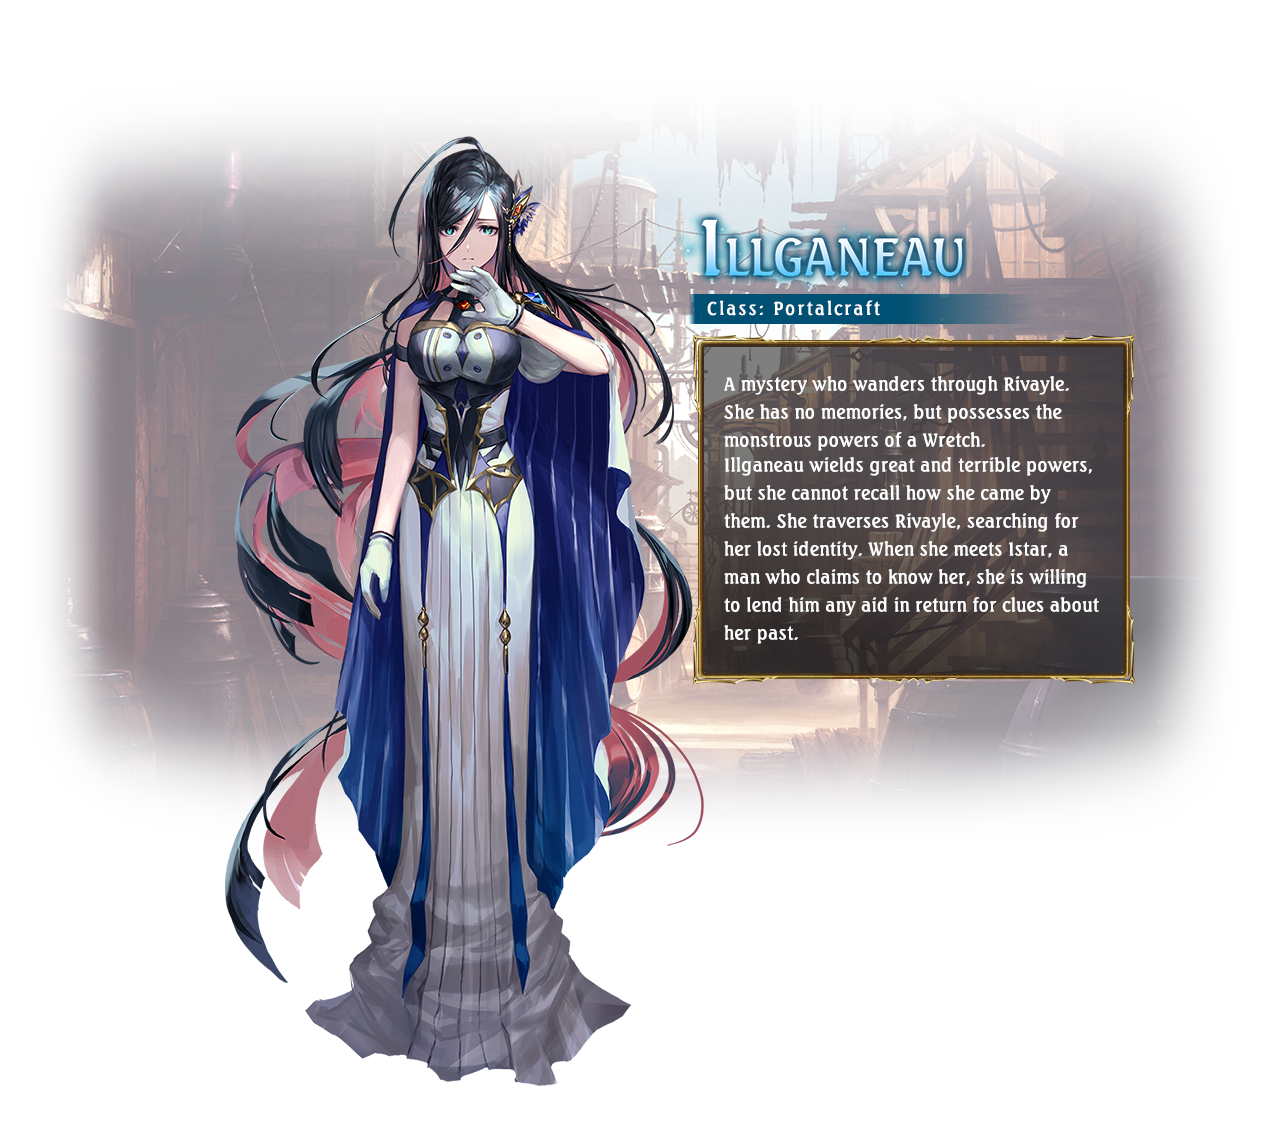 Illganeau Class: Portalcraft A mystery who wanders through Rivayle. She has no memories, but possesses the monstrous powers of a Wretch.Illganeau wields great and terrible powers, but she cannot recall how she came by them. She traverses Rivayle, searching for her lost identity. When she meets Istar, a man who claims to know her, she is willing to lend him any aid in return for clues about her past.